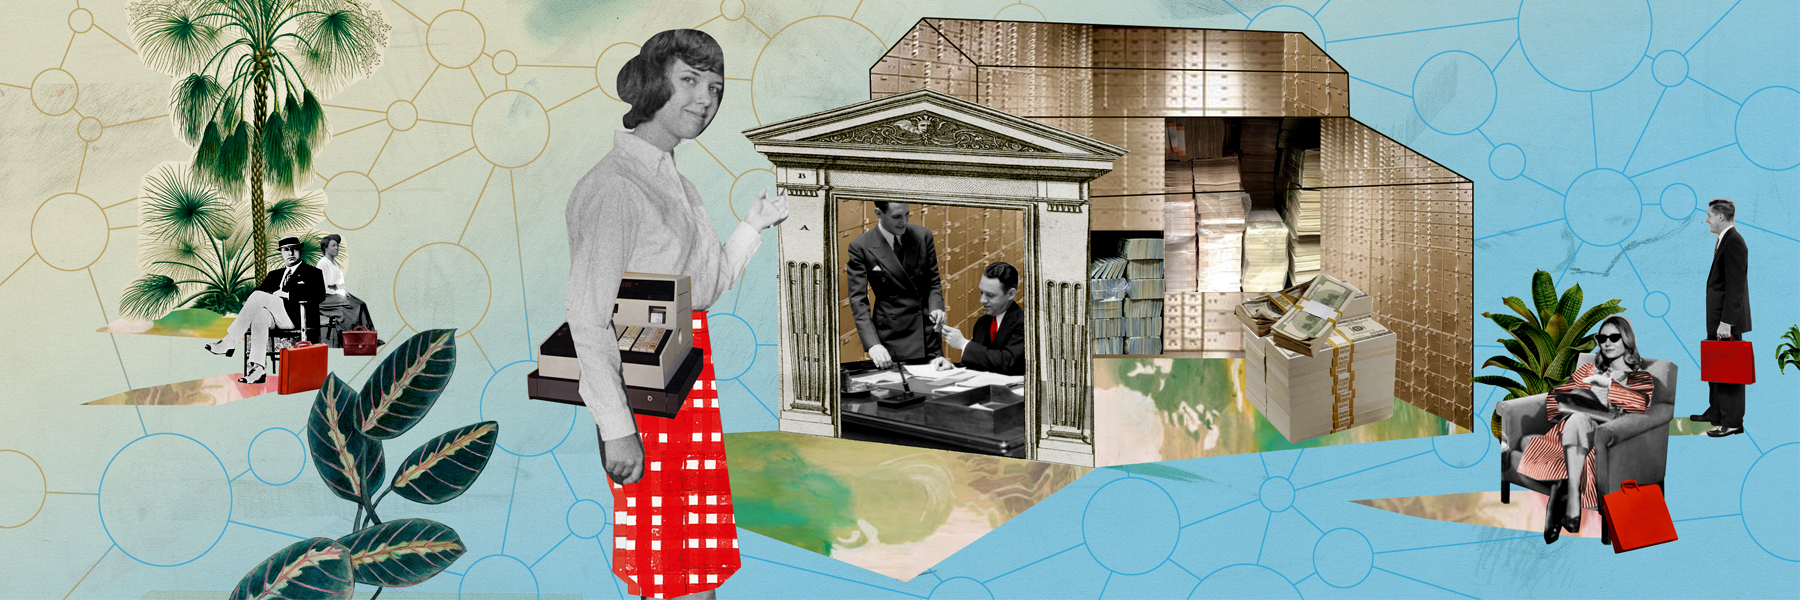 Collage illustration about banking